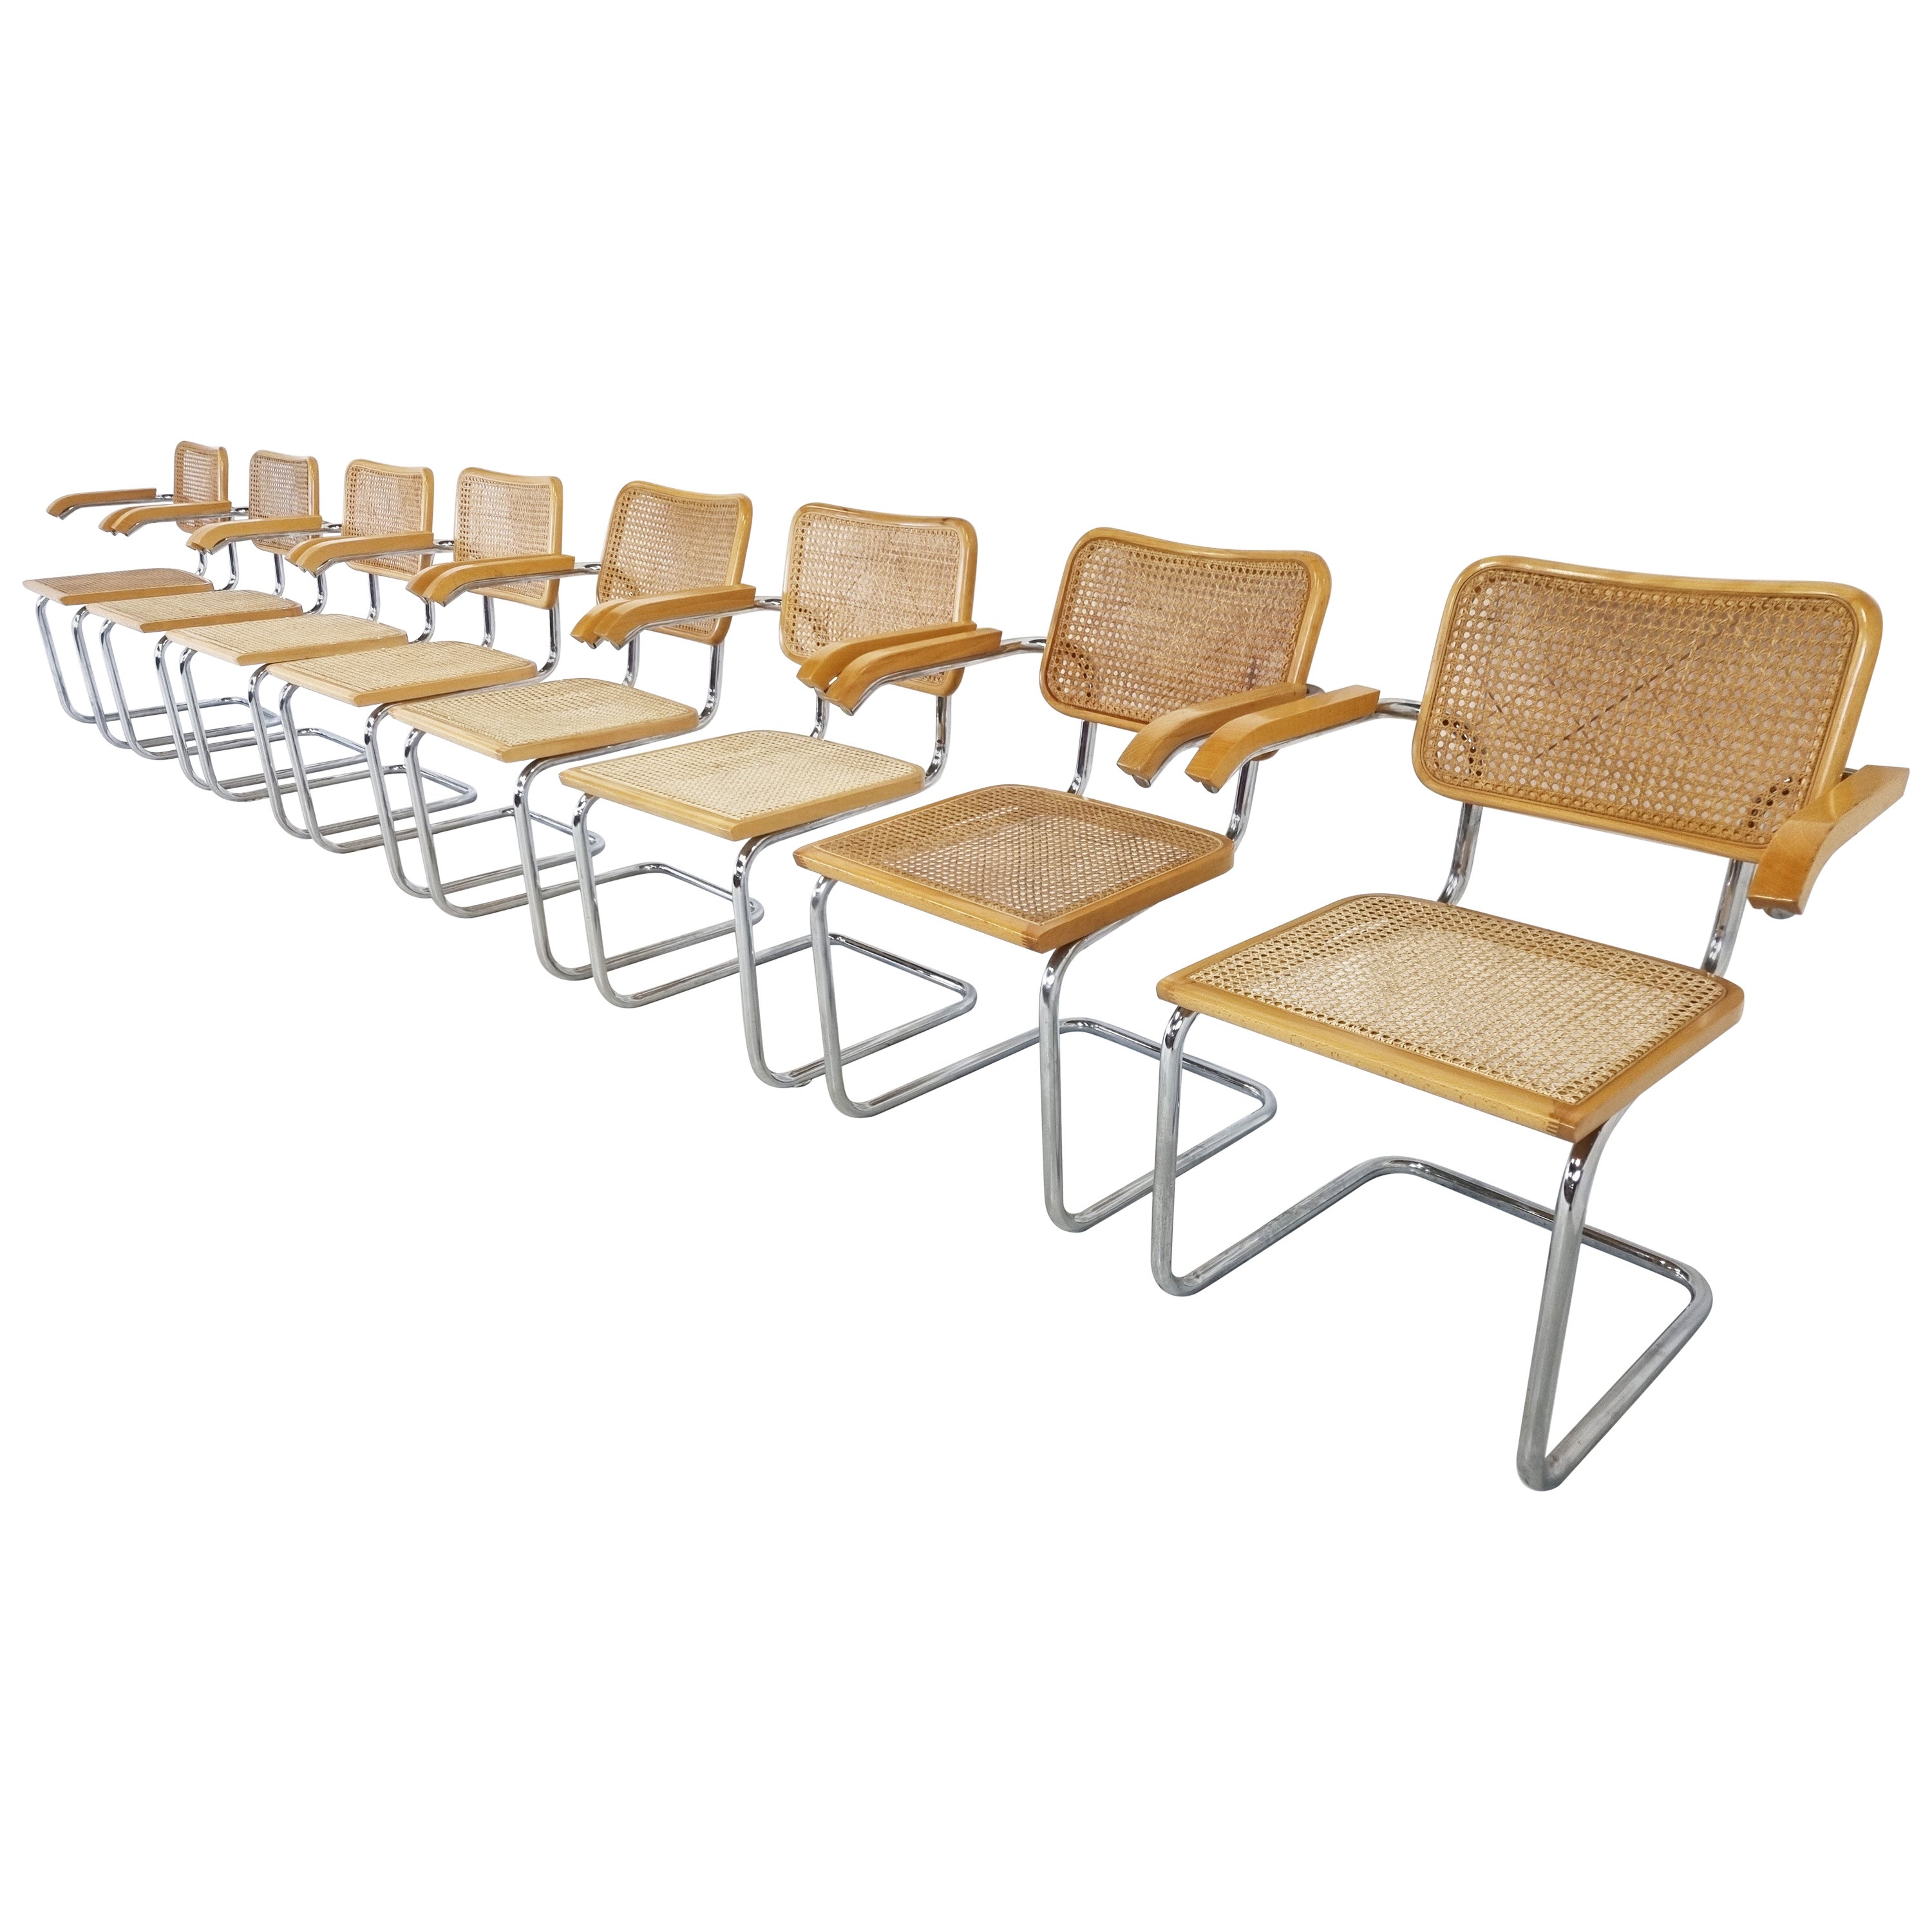 Set of 8 Vintage Marcel Breuer Style Armchairs, Made in Italy, 1970s